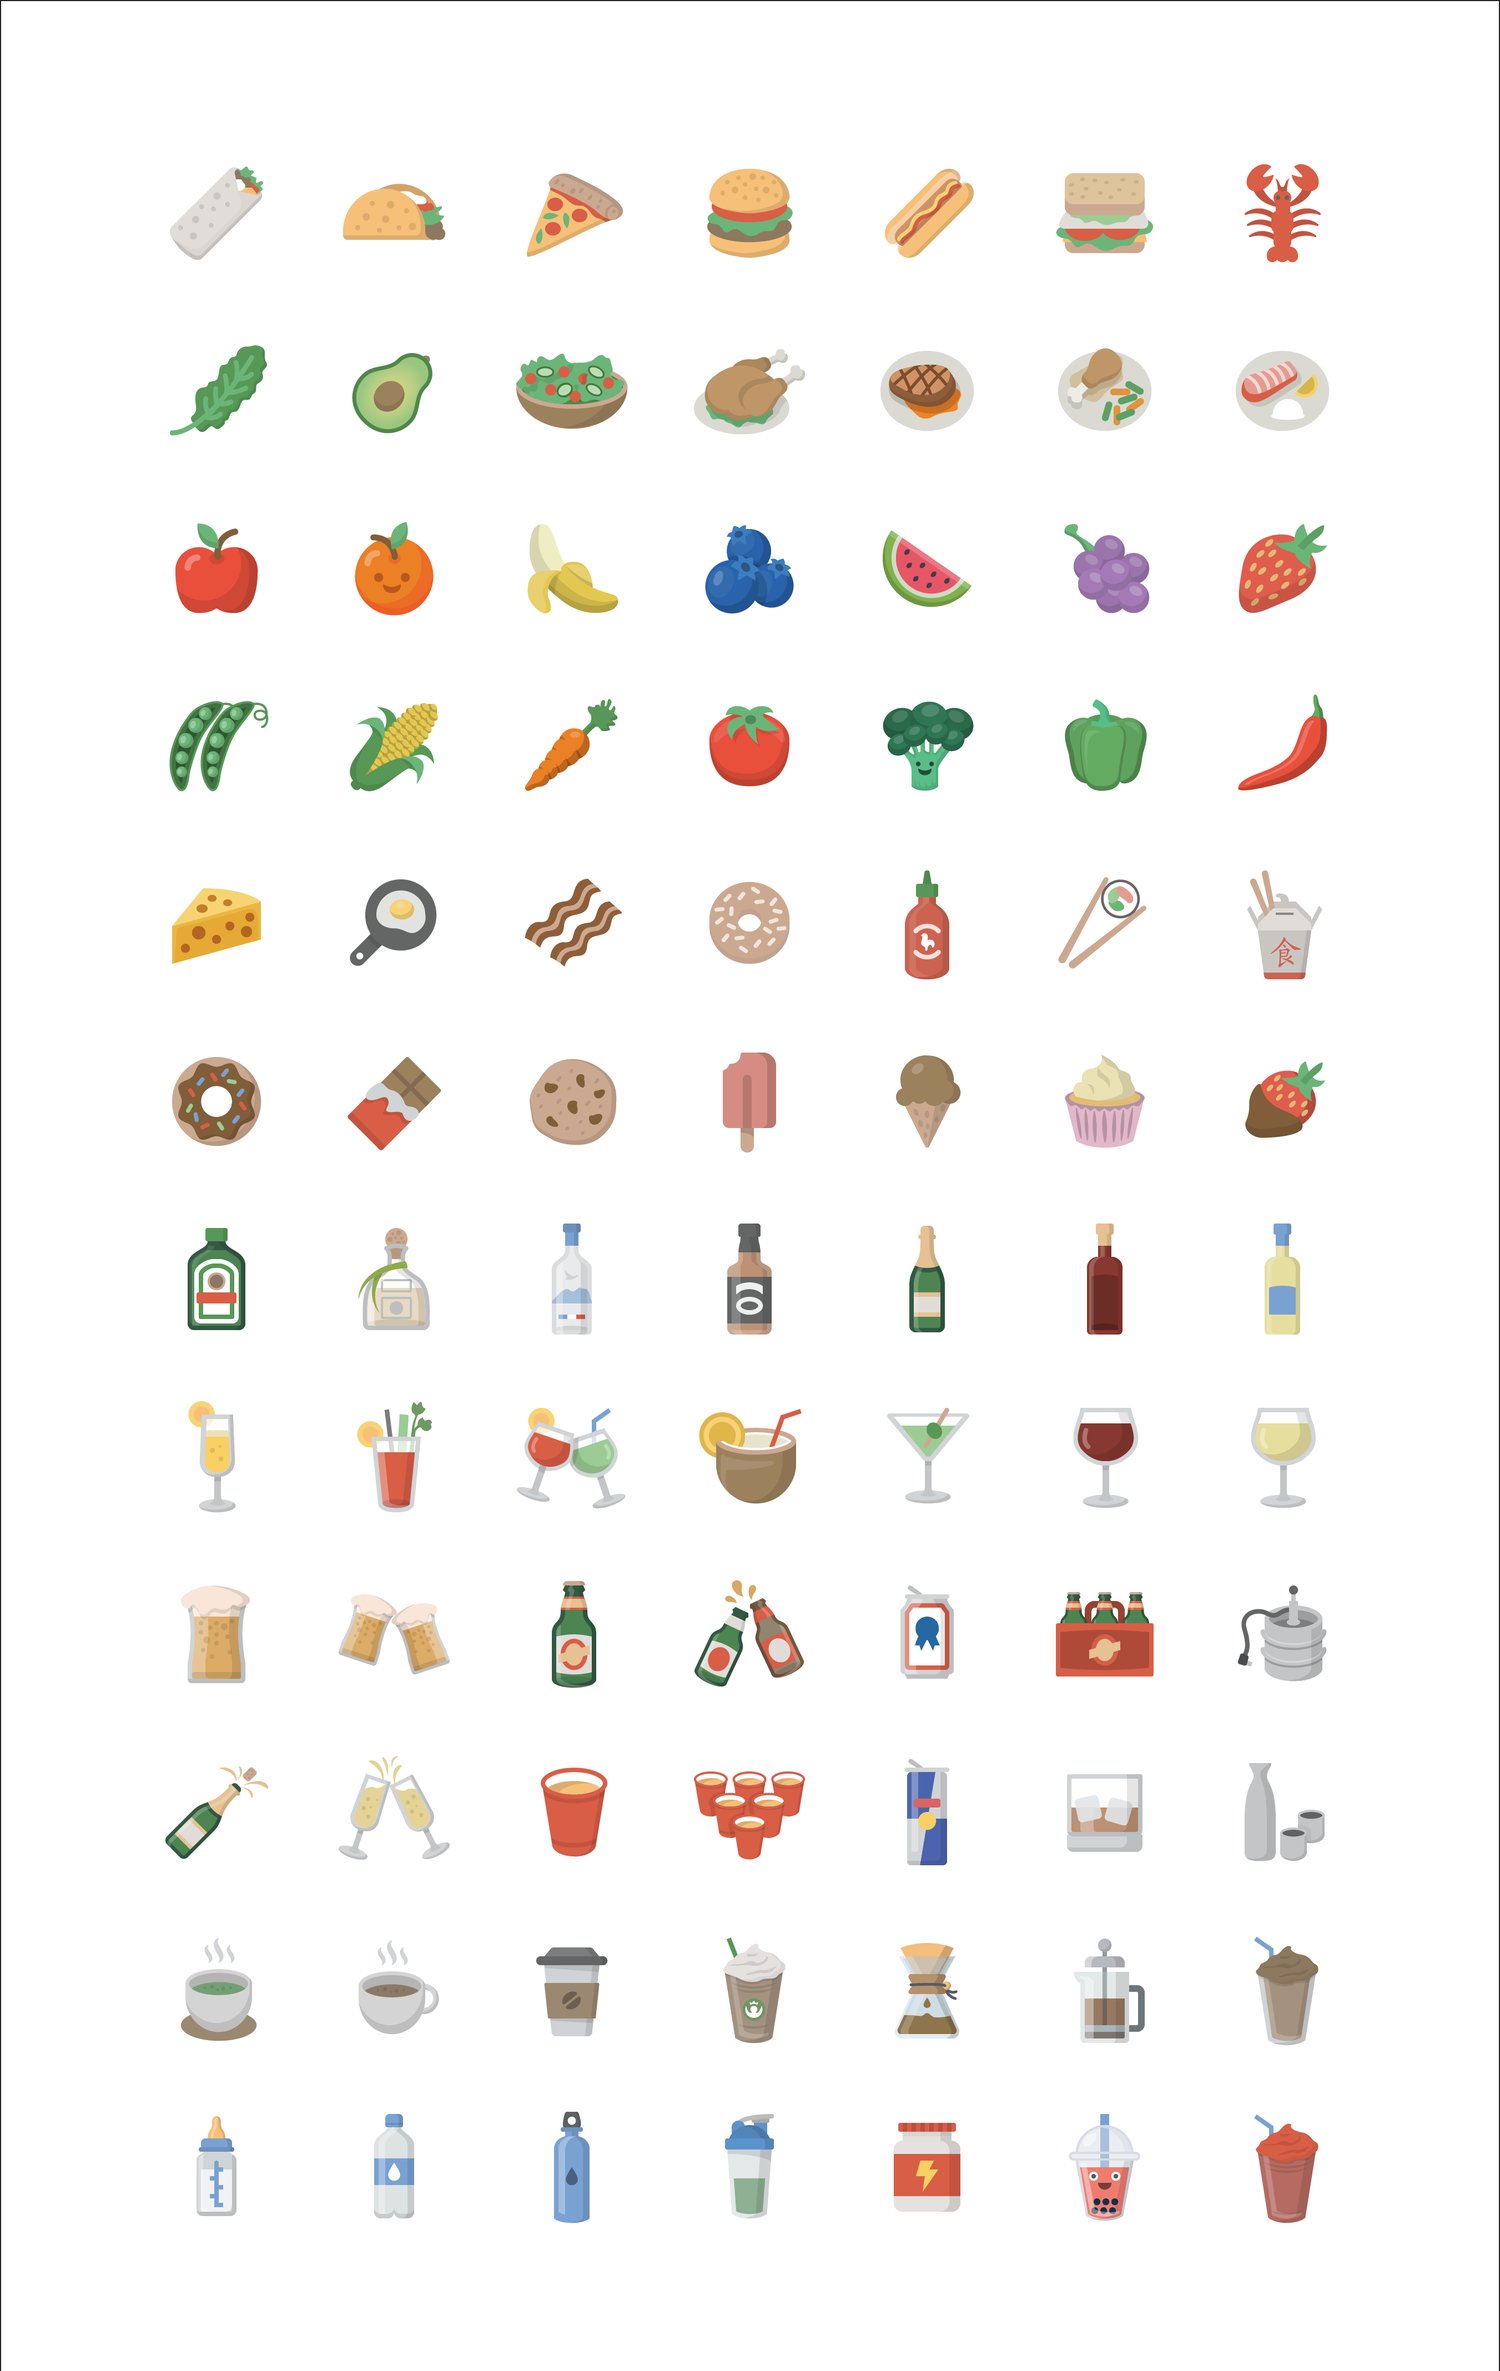 Food Emoji - 84 Vector Icons cover image.